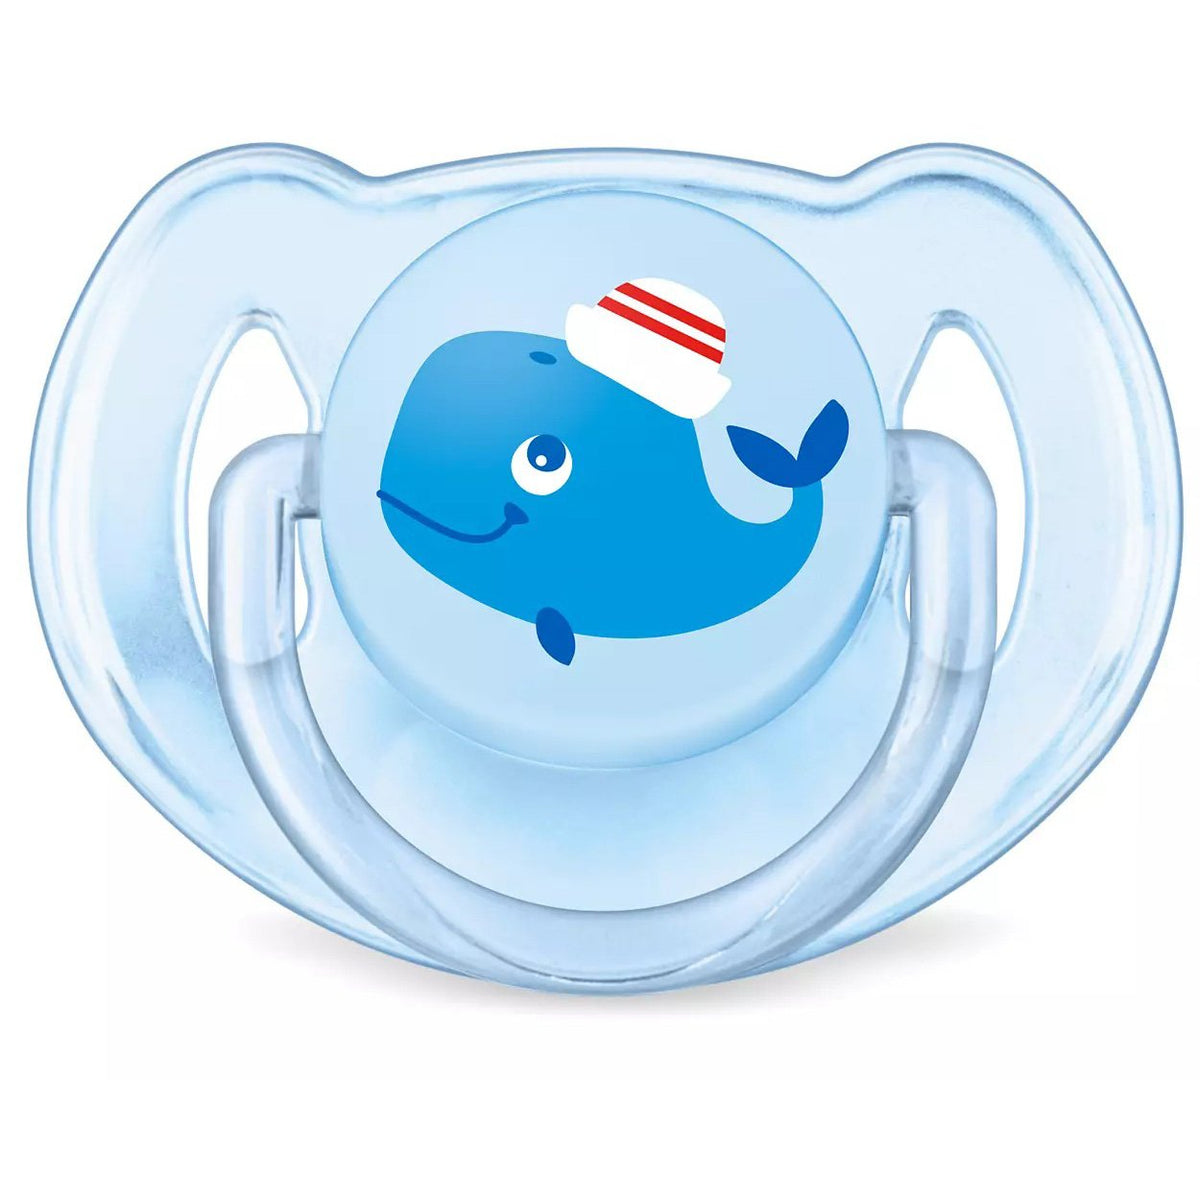 philips-avent-classic-pacifier- (5)